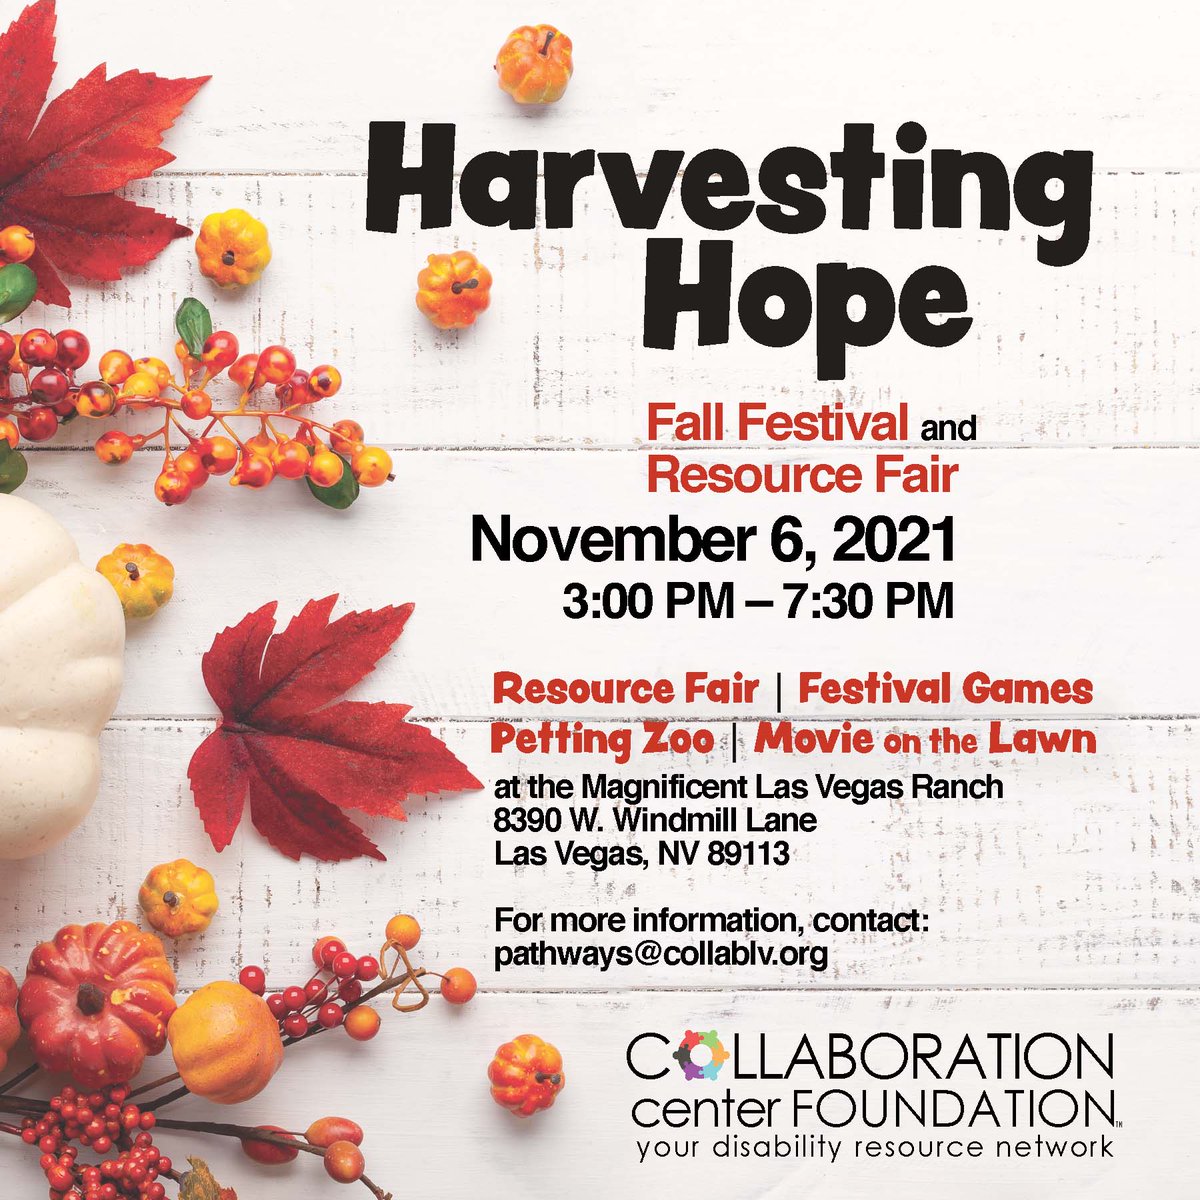 #SONV is excited to be a vendor at #HarvestingHope, a Fall Festival and Resource Fair coming up on November 6th. Help us spread the word by sharing with your friends and family. We look forward to seeing you there! #fallfestival #familyfriendlyevent #vegasevents #collablv